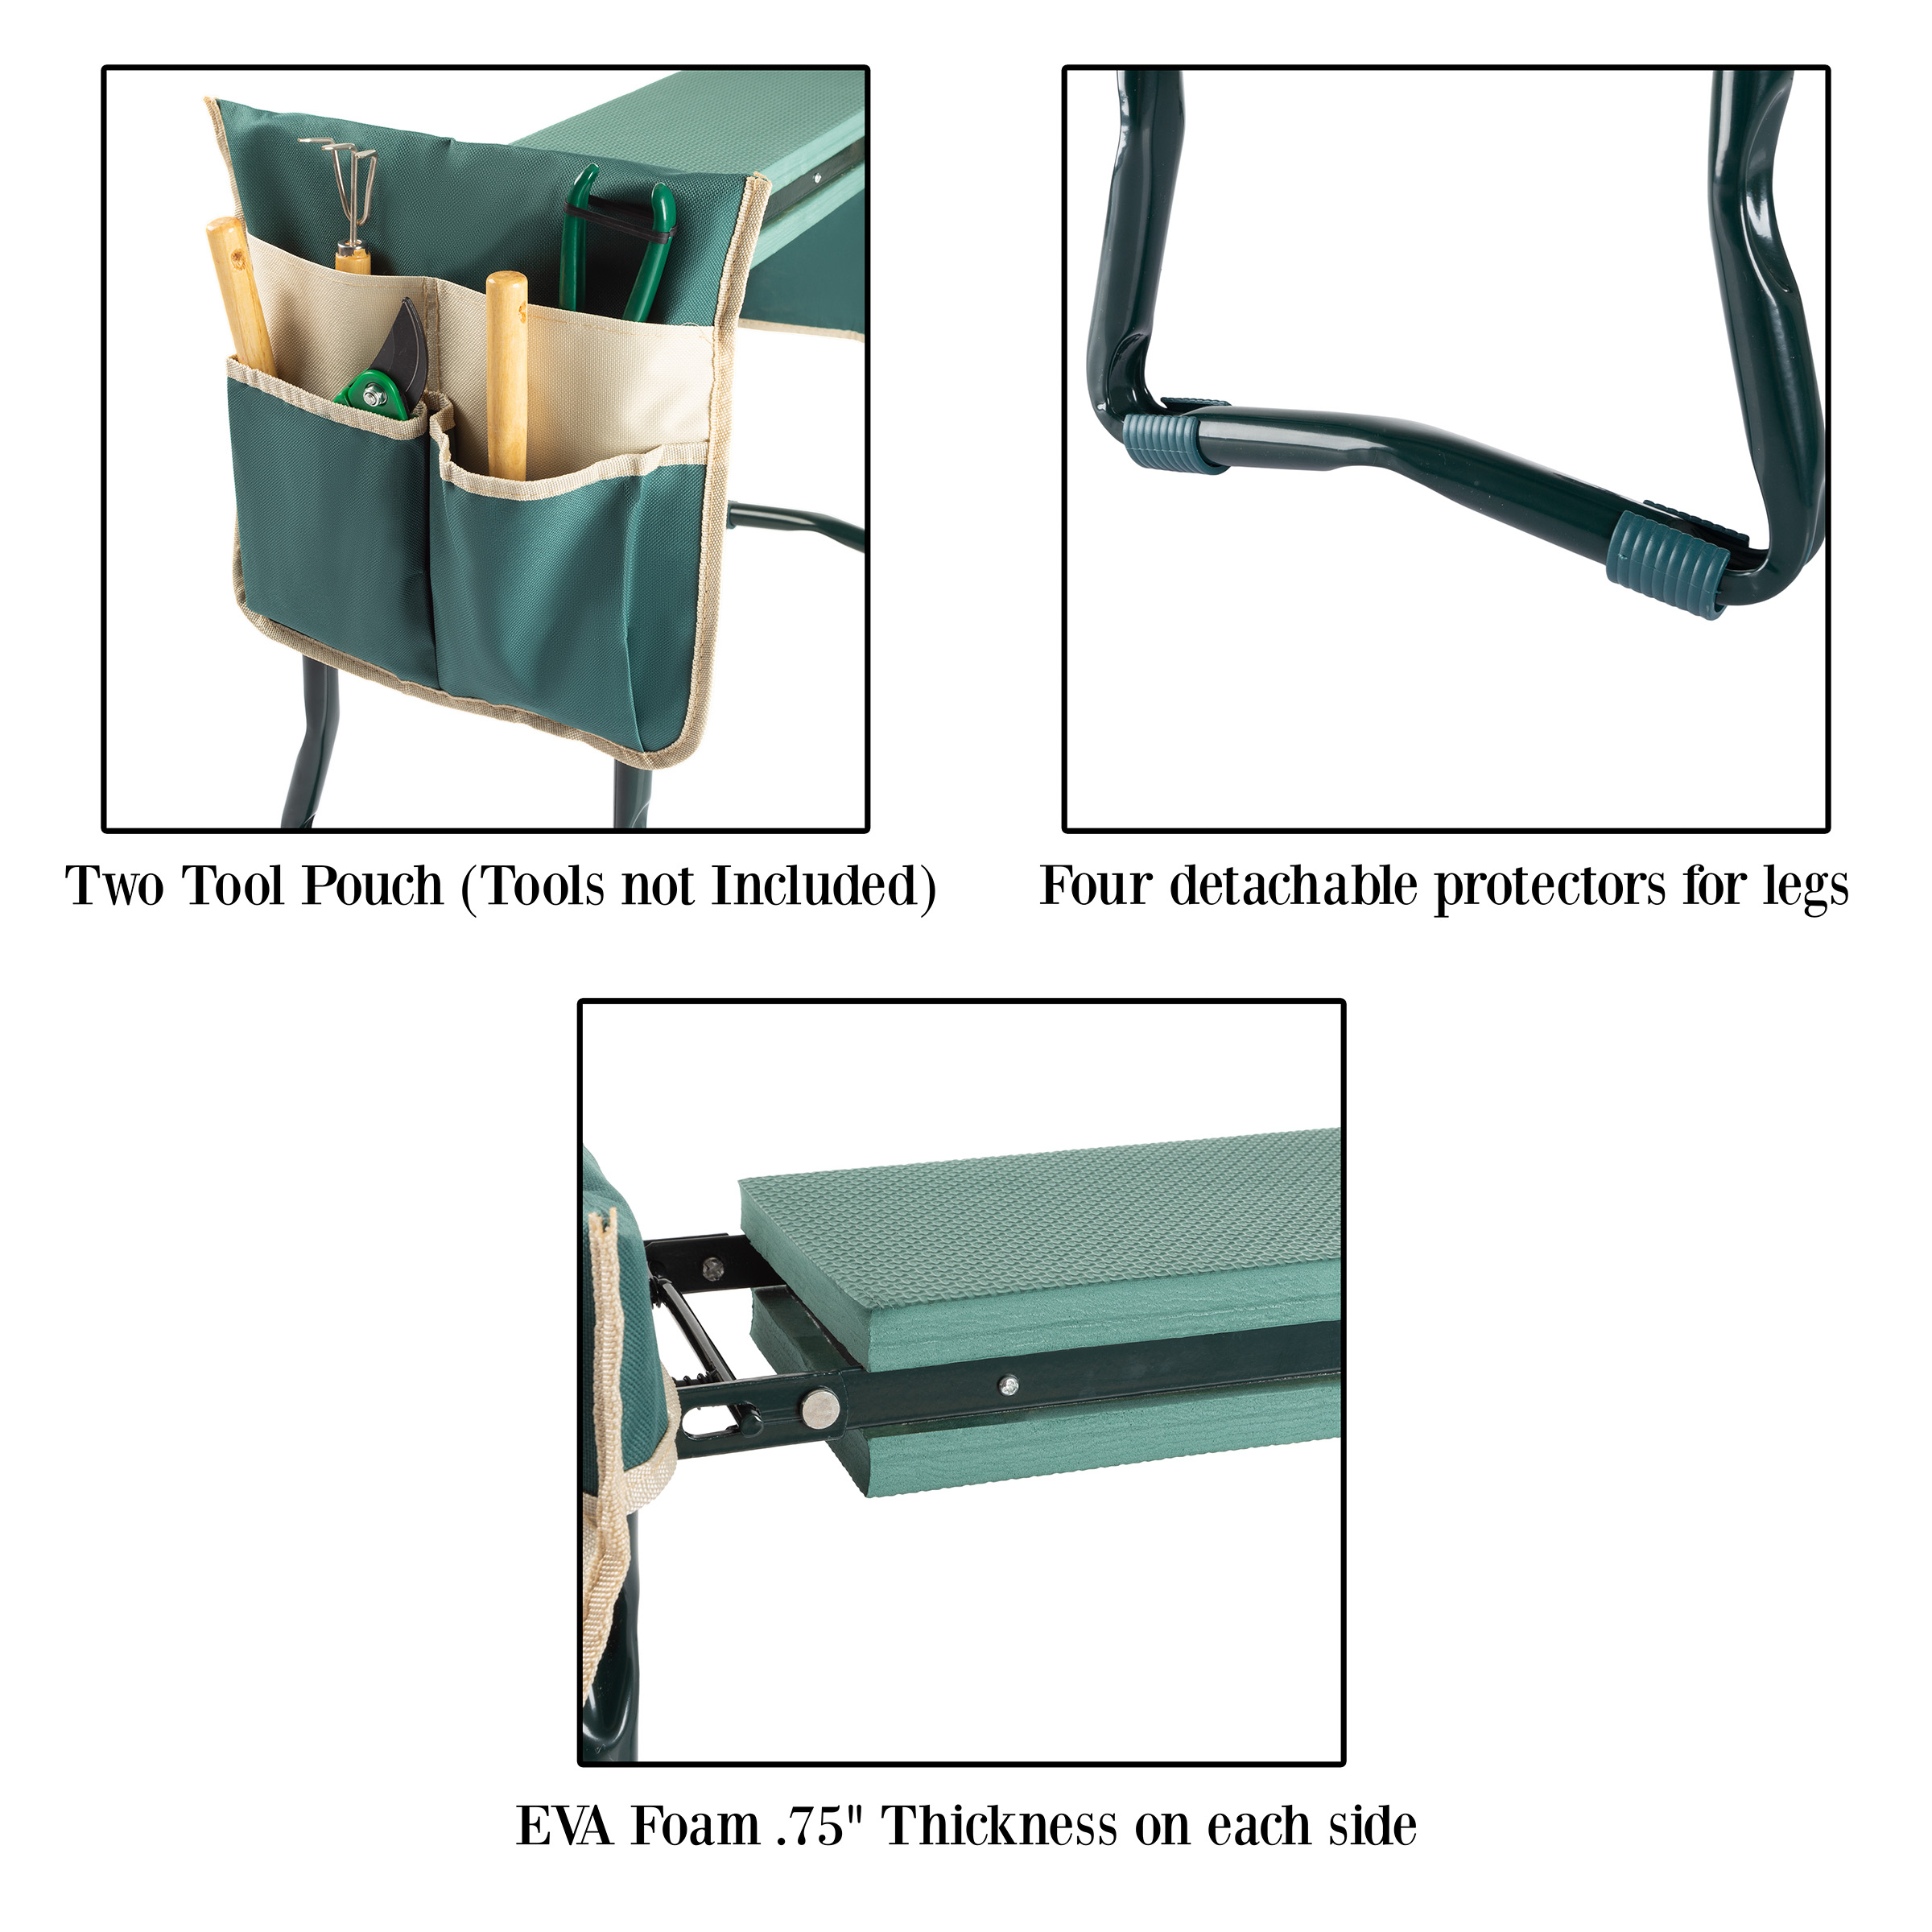 Pure Garden Kneeler Bench - Foldable Stool with 2 Tool Pouches (Green) - image 4 of 7